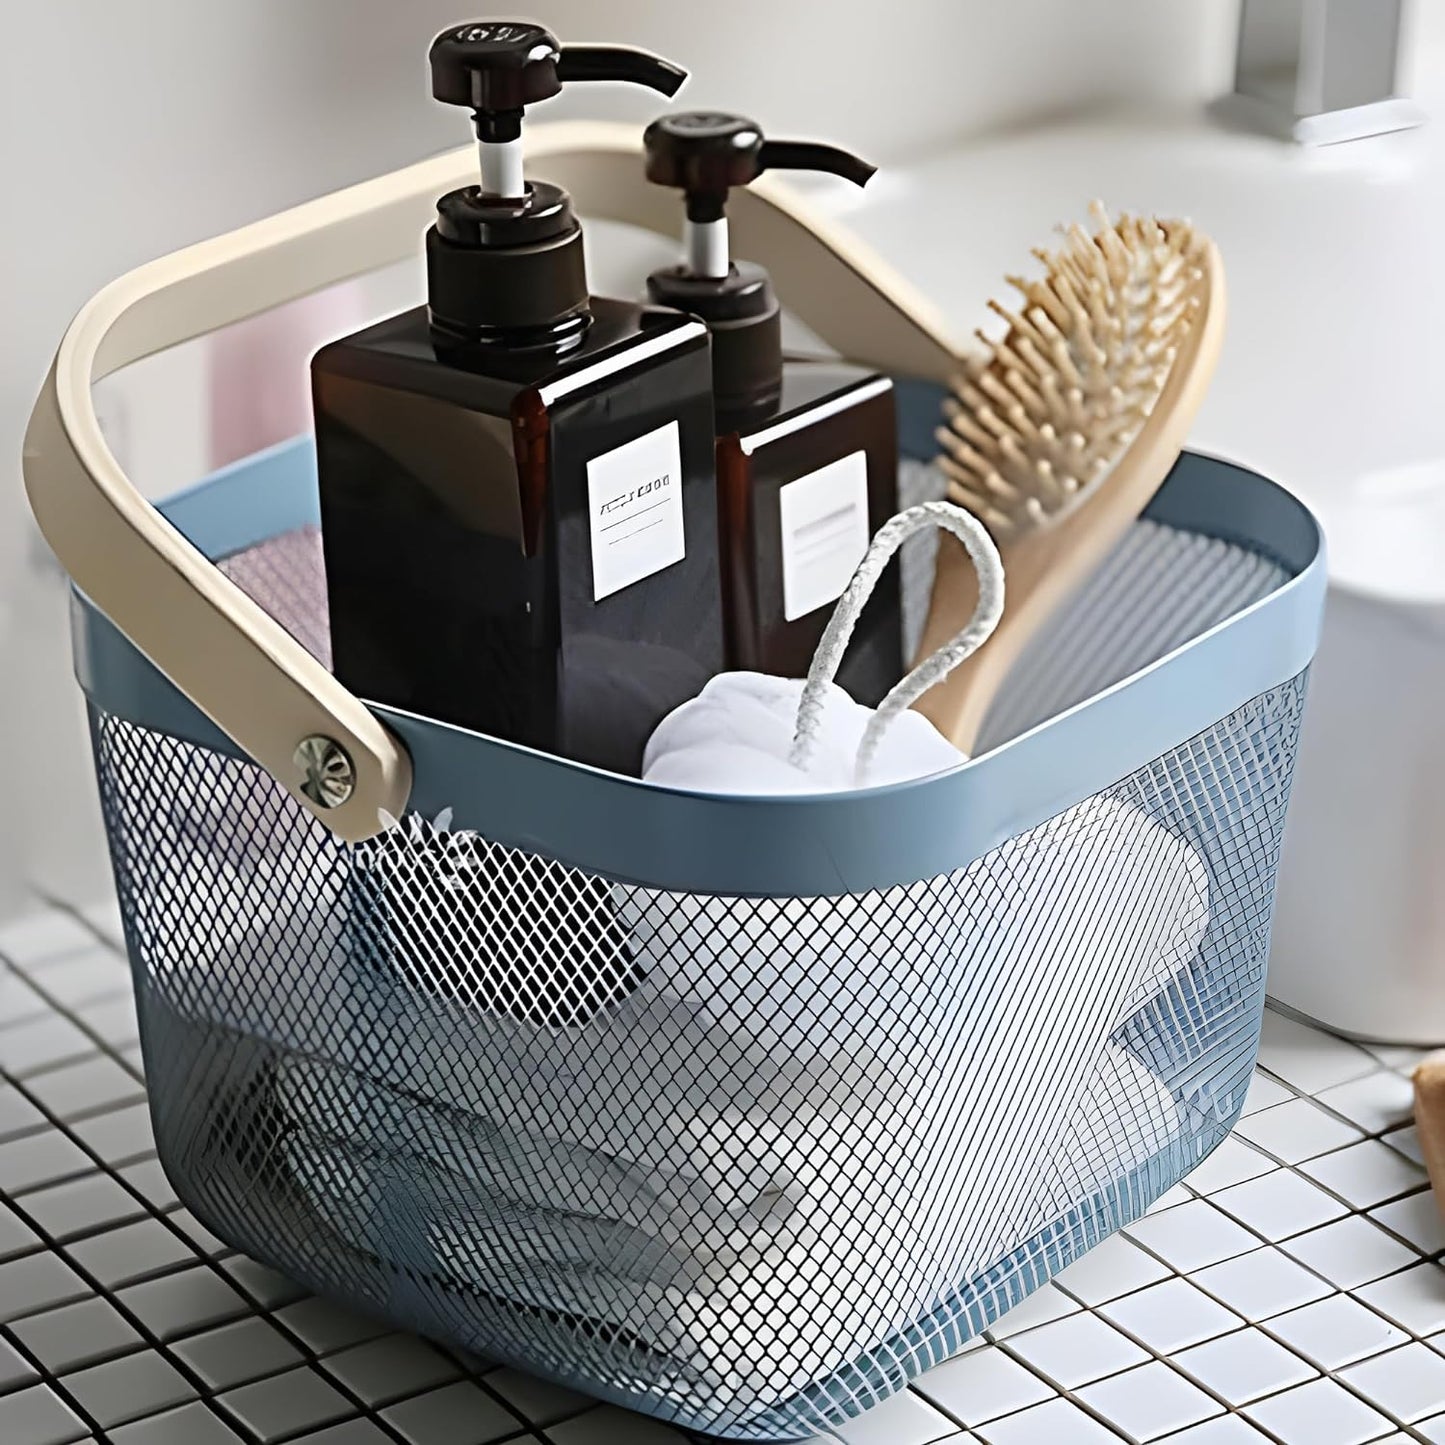 Mesh Steel Basket with Wooden Handle-Square Blue